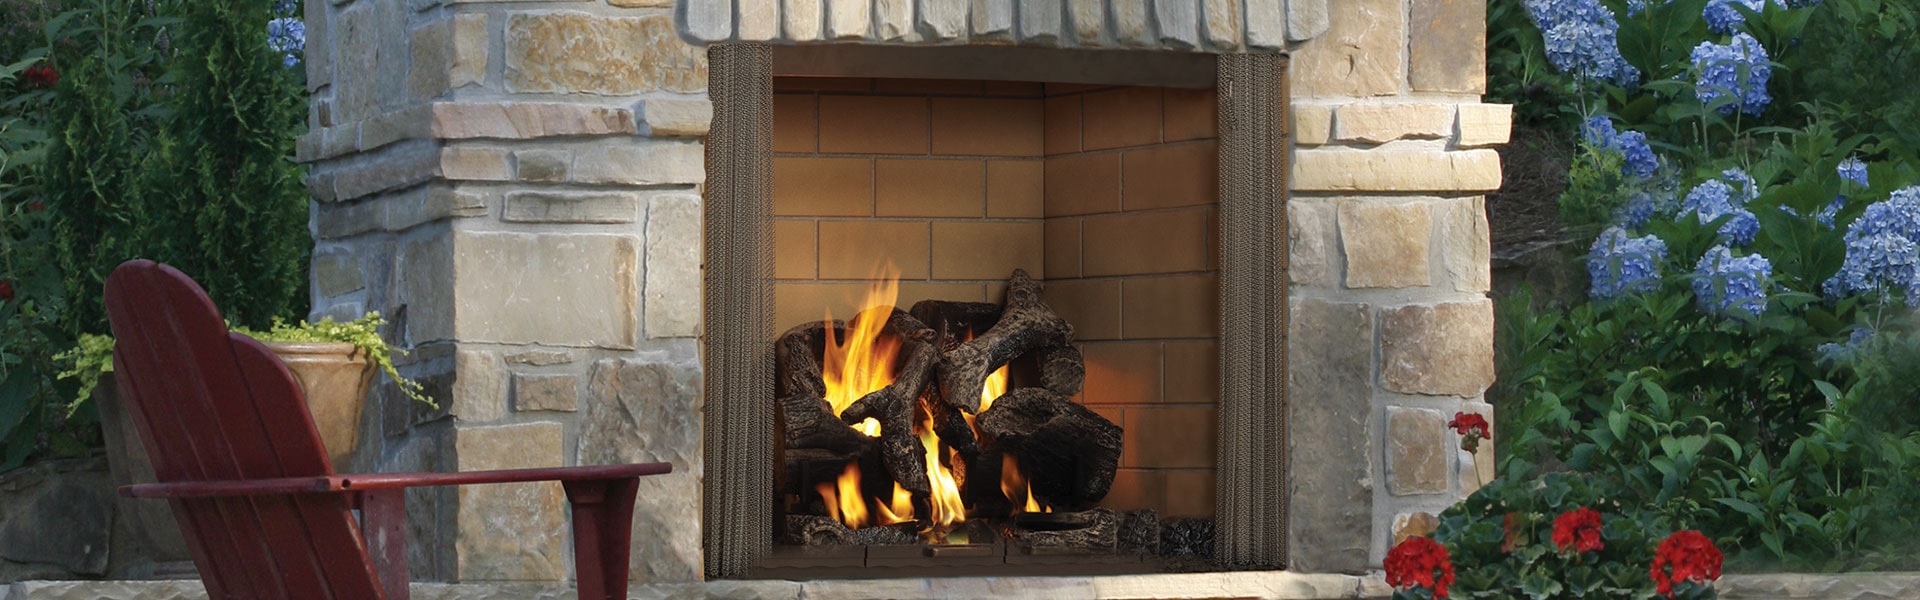 Fireboxes for Wood Burning Fireplaces Fresh Castlewood Wood Fireplace